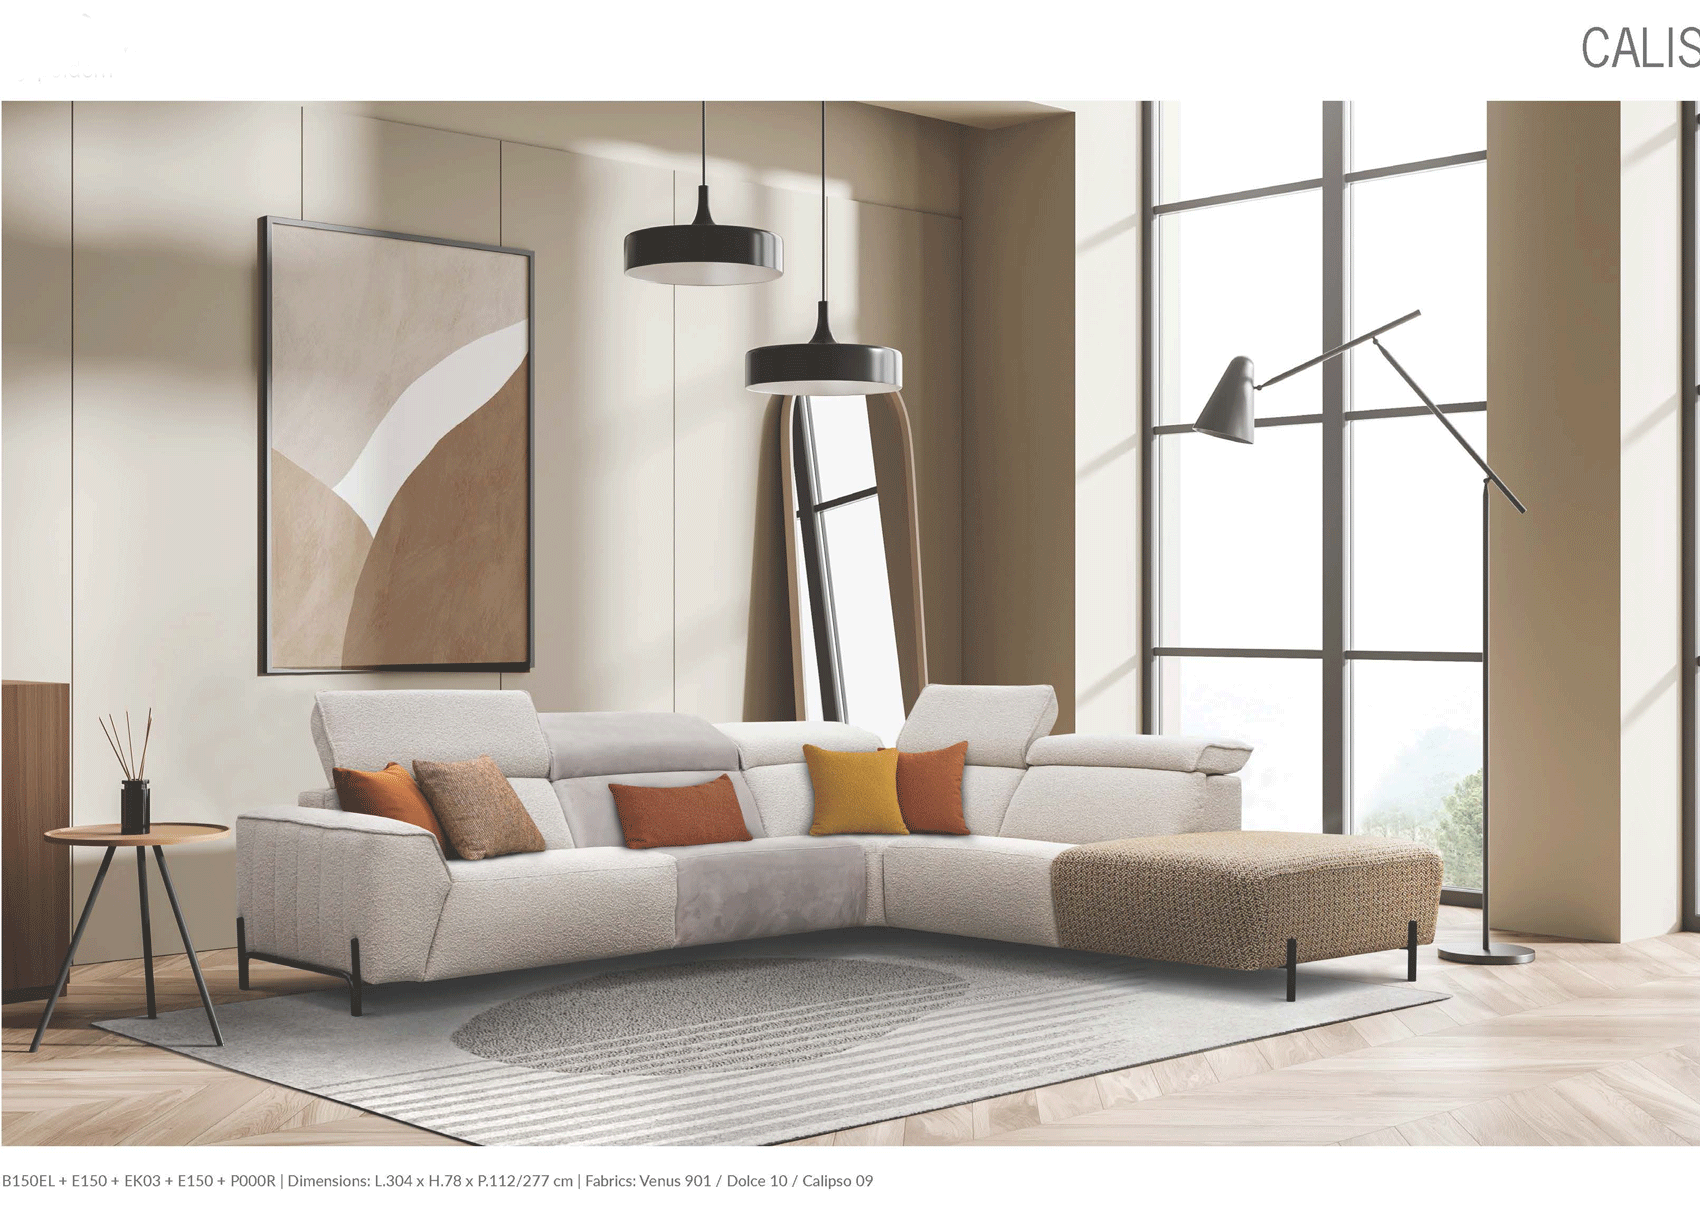 Brands Arredoclassic Living Room, Italy Calis Sectional